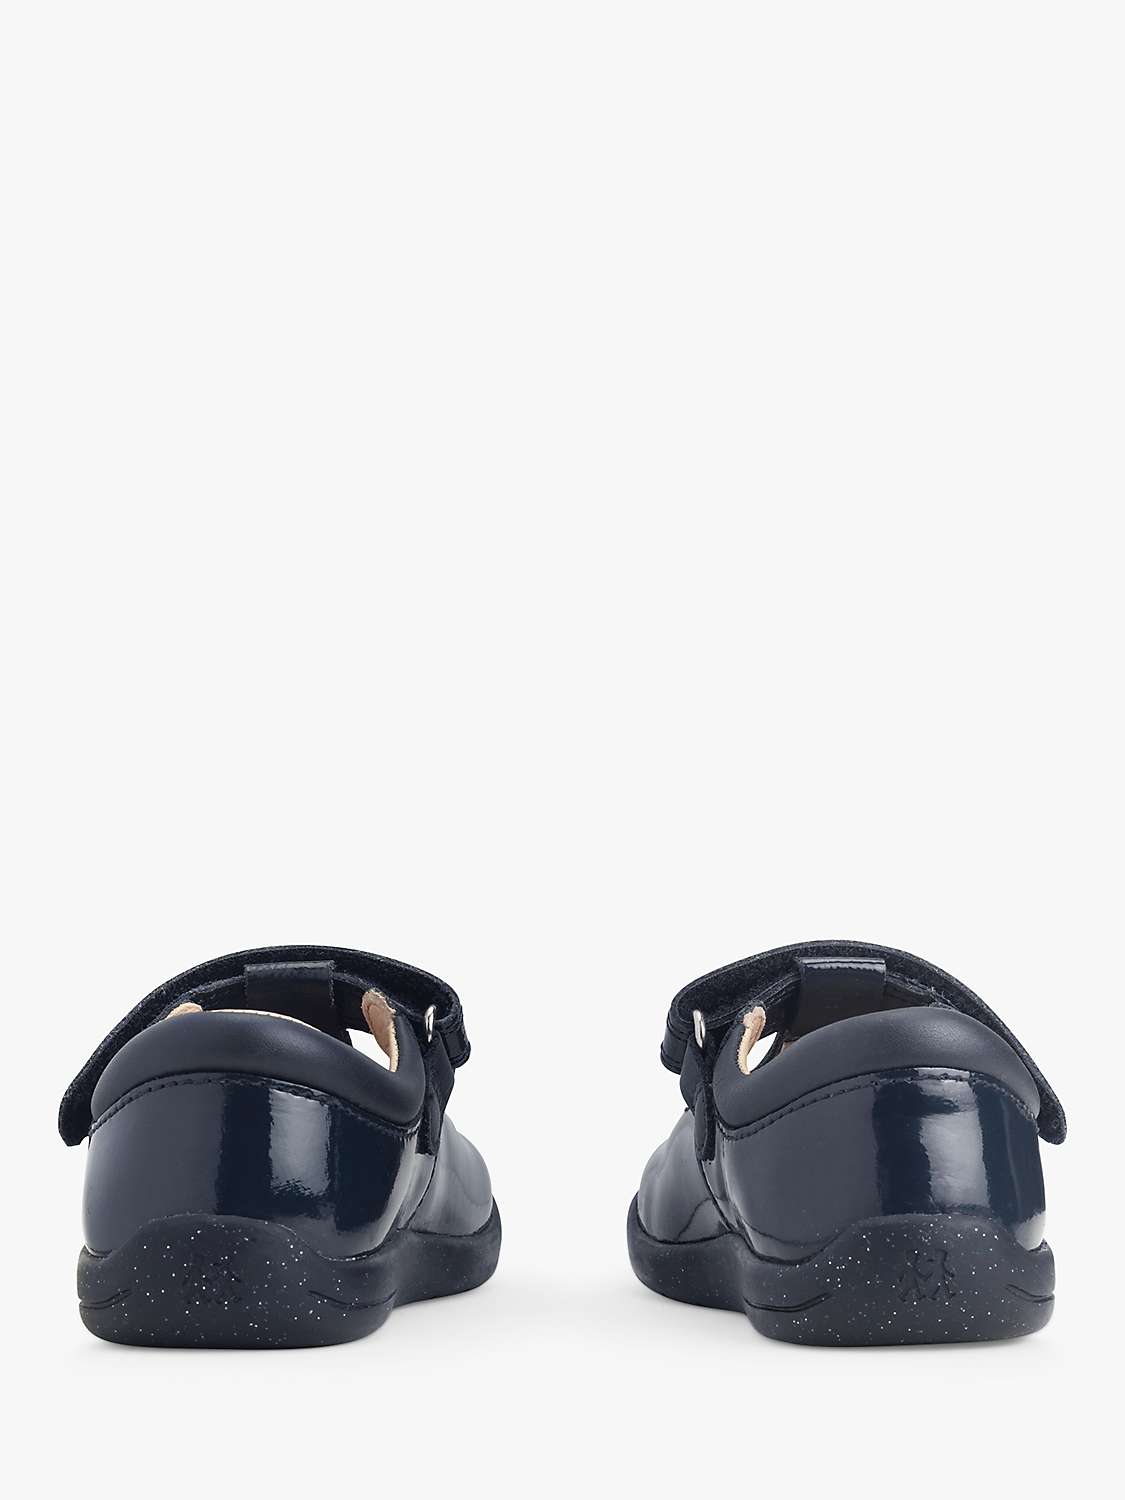 Buy Start-Rite Kids' Puzzle Leather Patent T-Bar Shoes, Navy Online at johnlewis.com